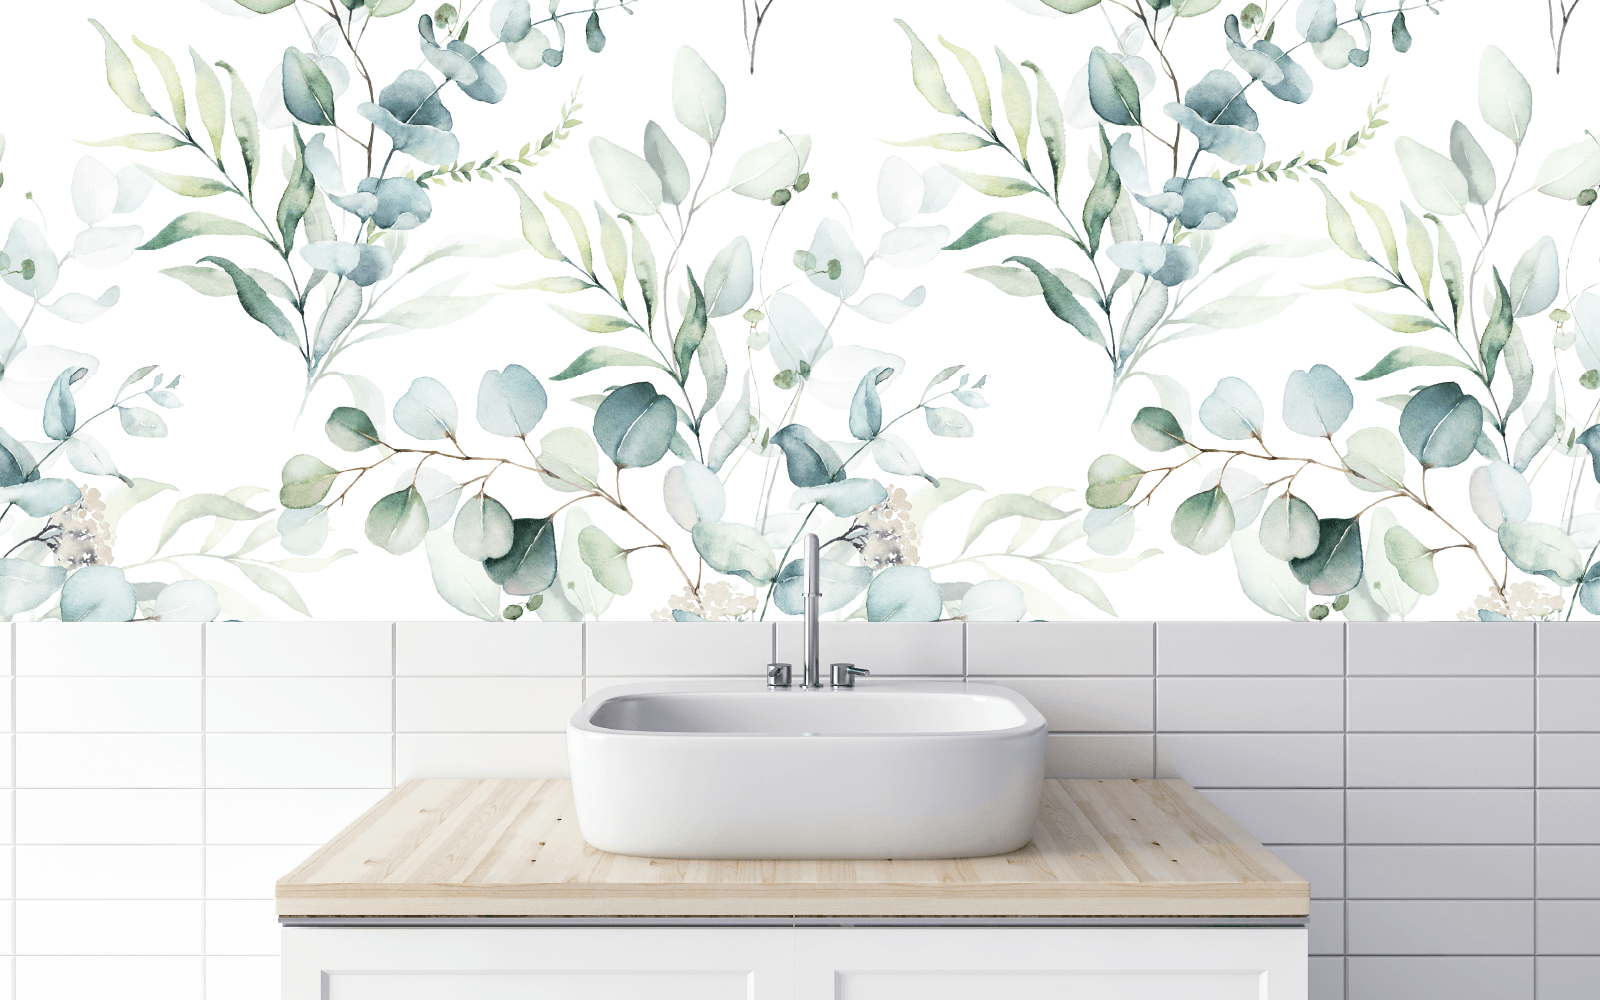 The refreshing splash of cool tones, frozen in a silent moment across this calming mural.